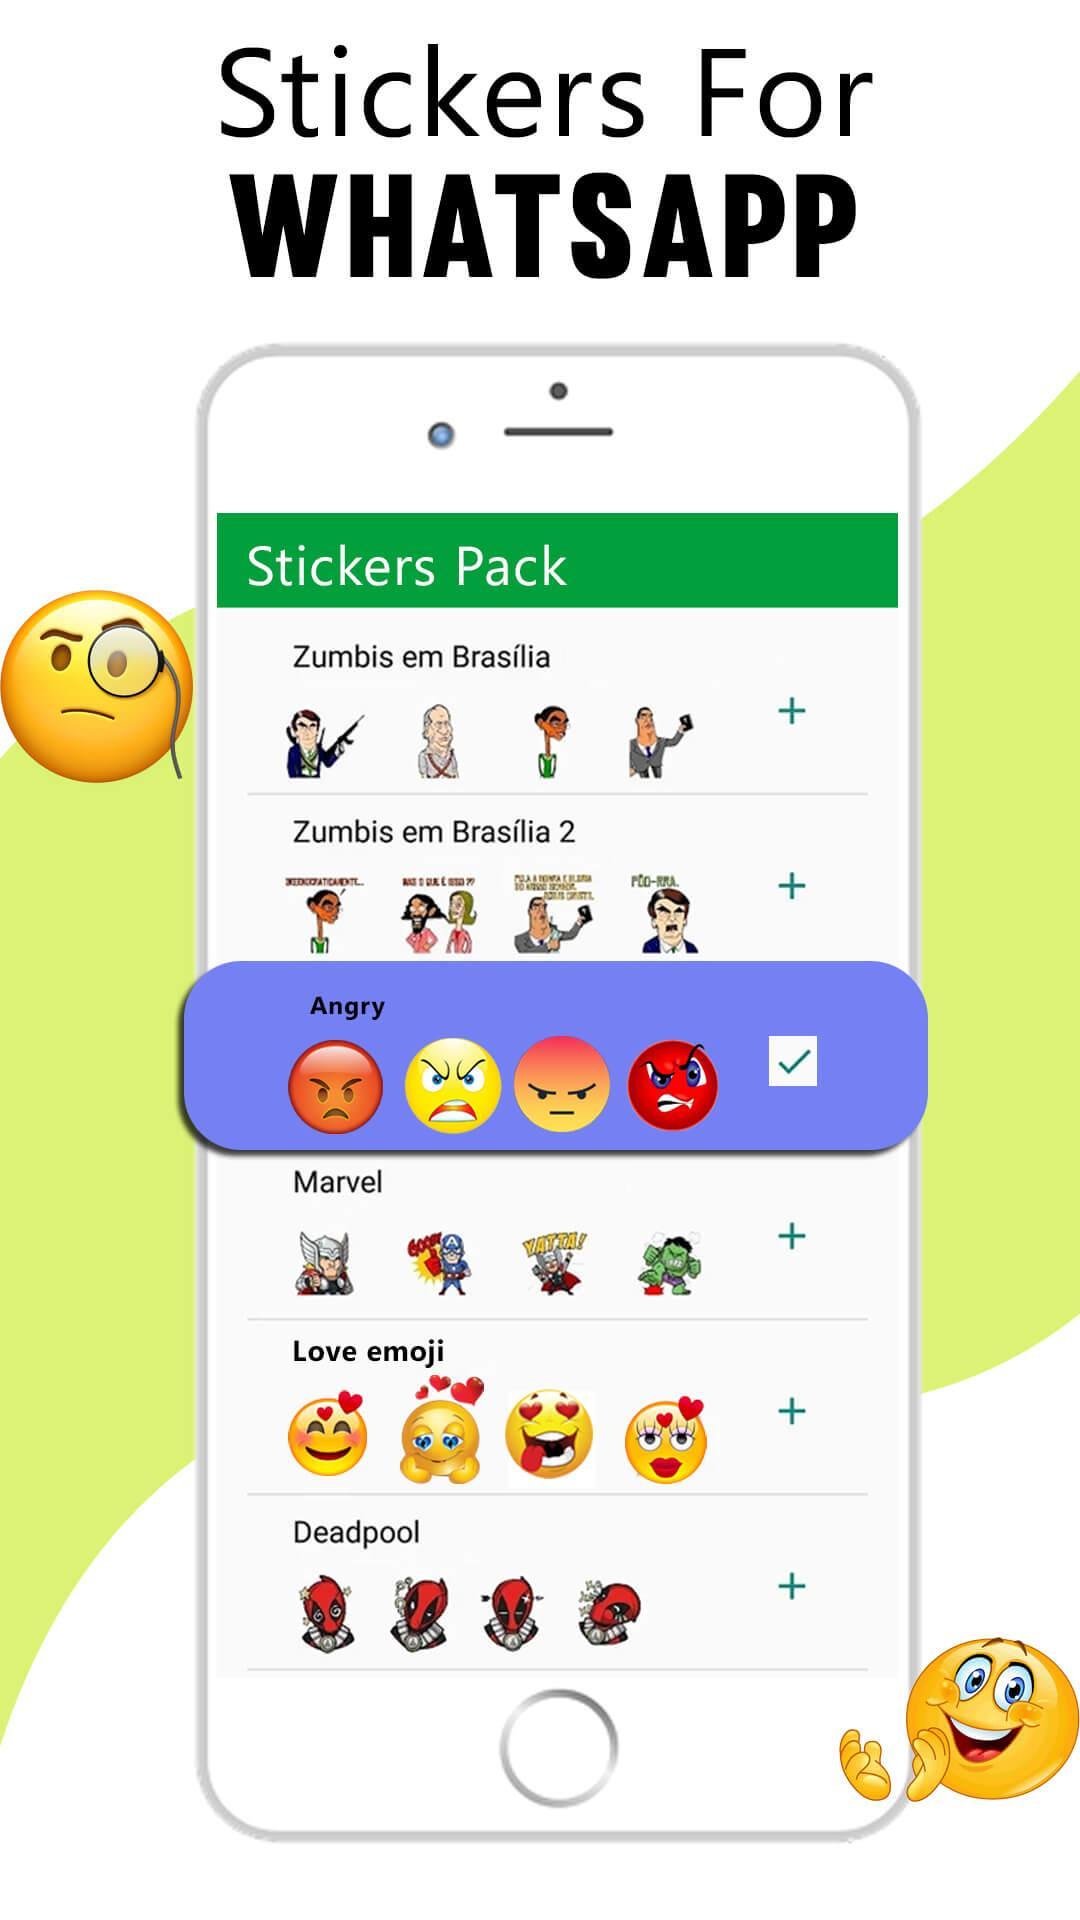 Wa Stickers For Whatsapp Wastickerapps 2019 For Android Apk Download